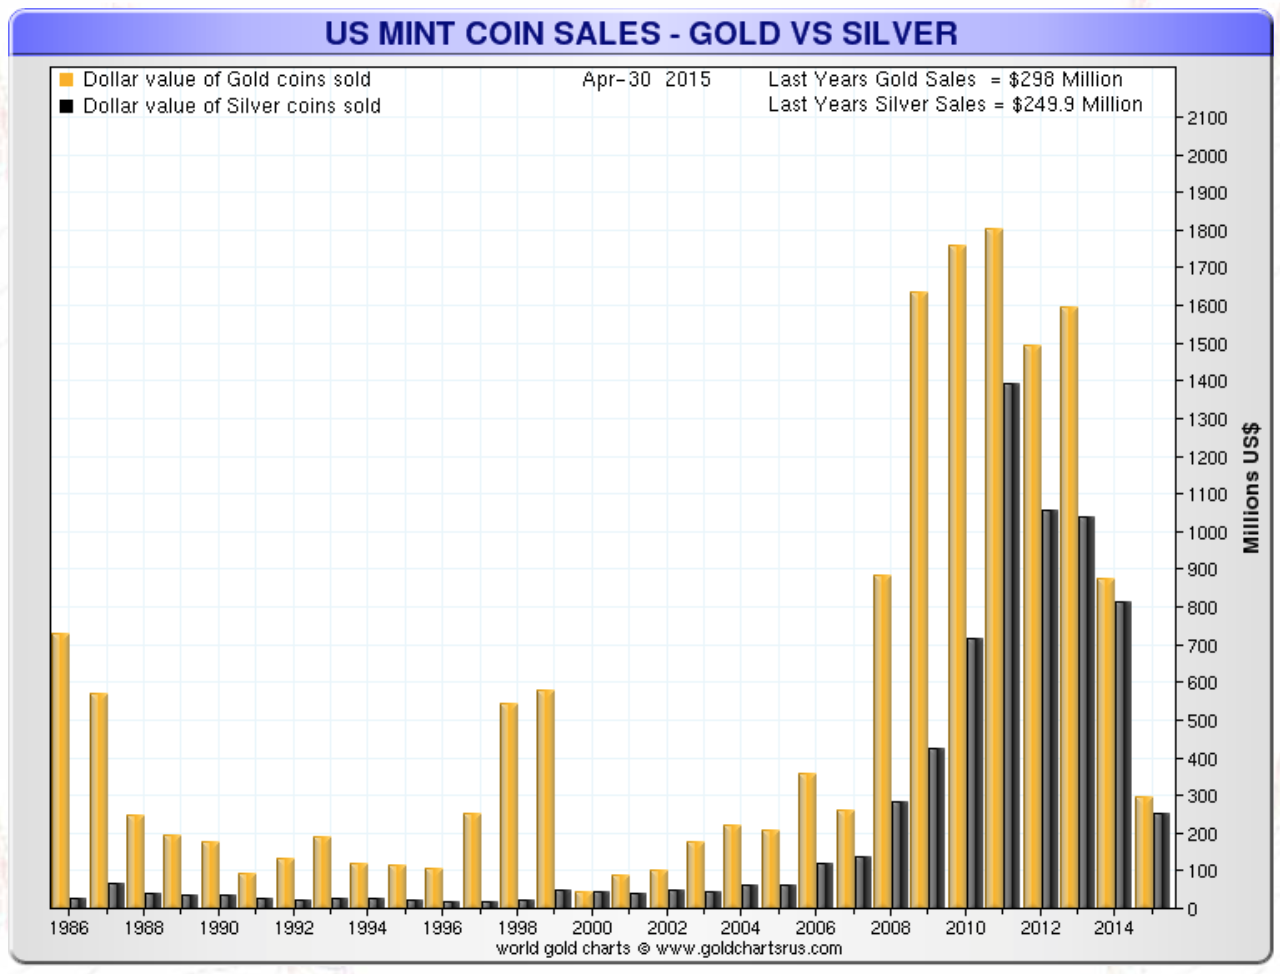 US Mint Coin Sales – Gold vs Silver (Million Dollars)